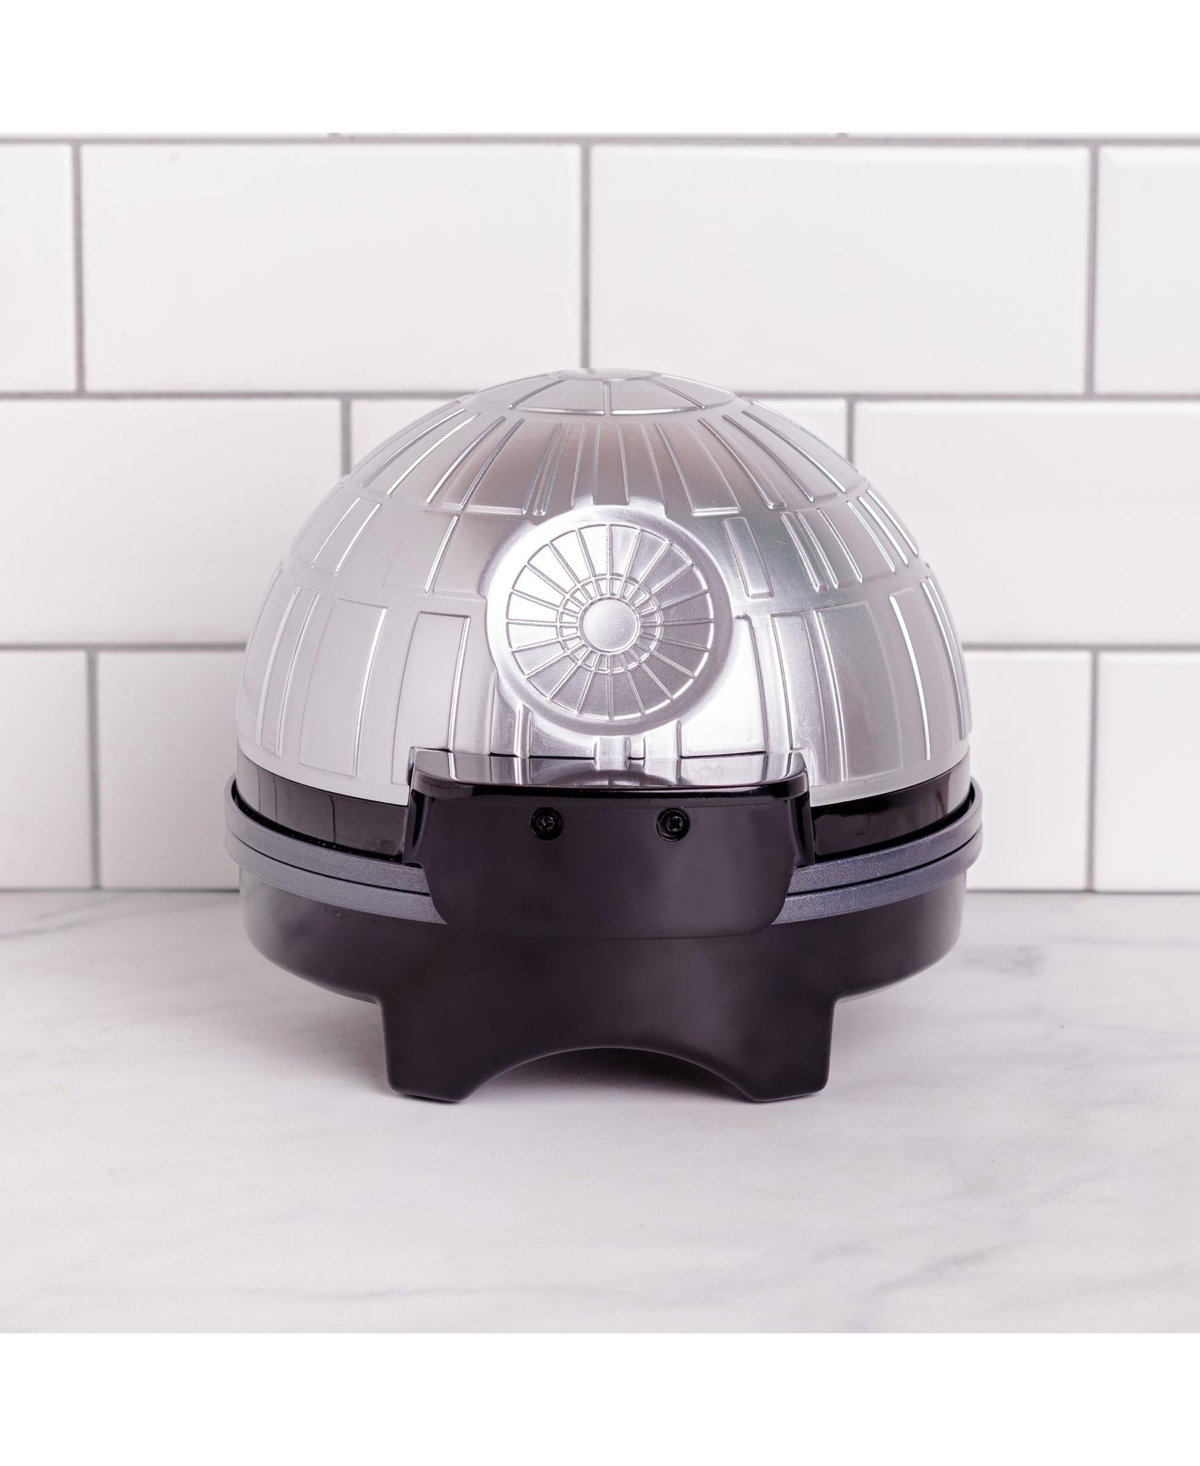 Uncanny Brands Star Wars Death Star Waffle Maker - Death Star On Your Waffles In Silver